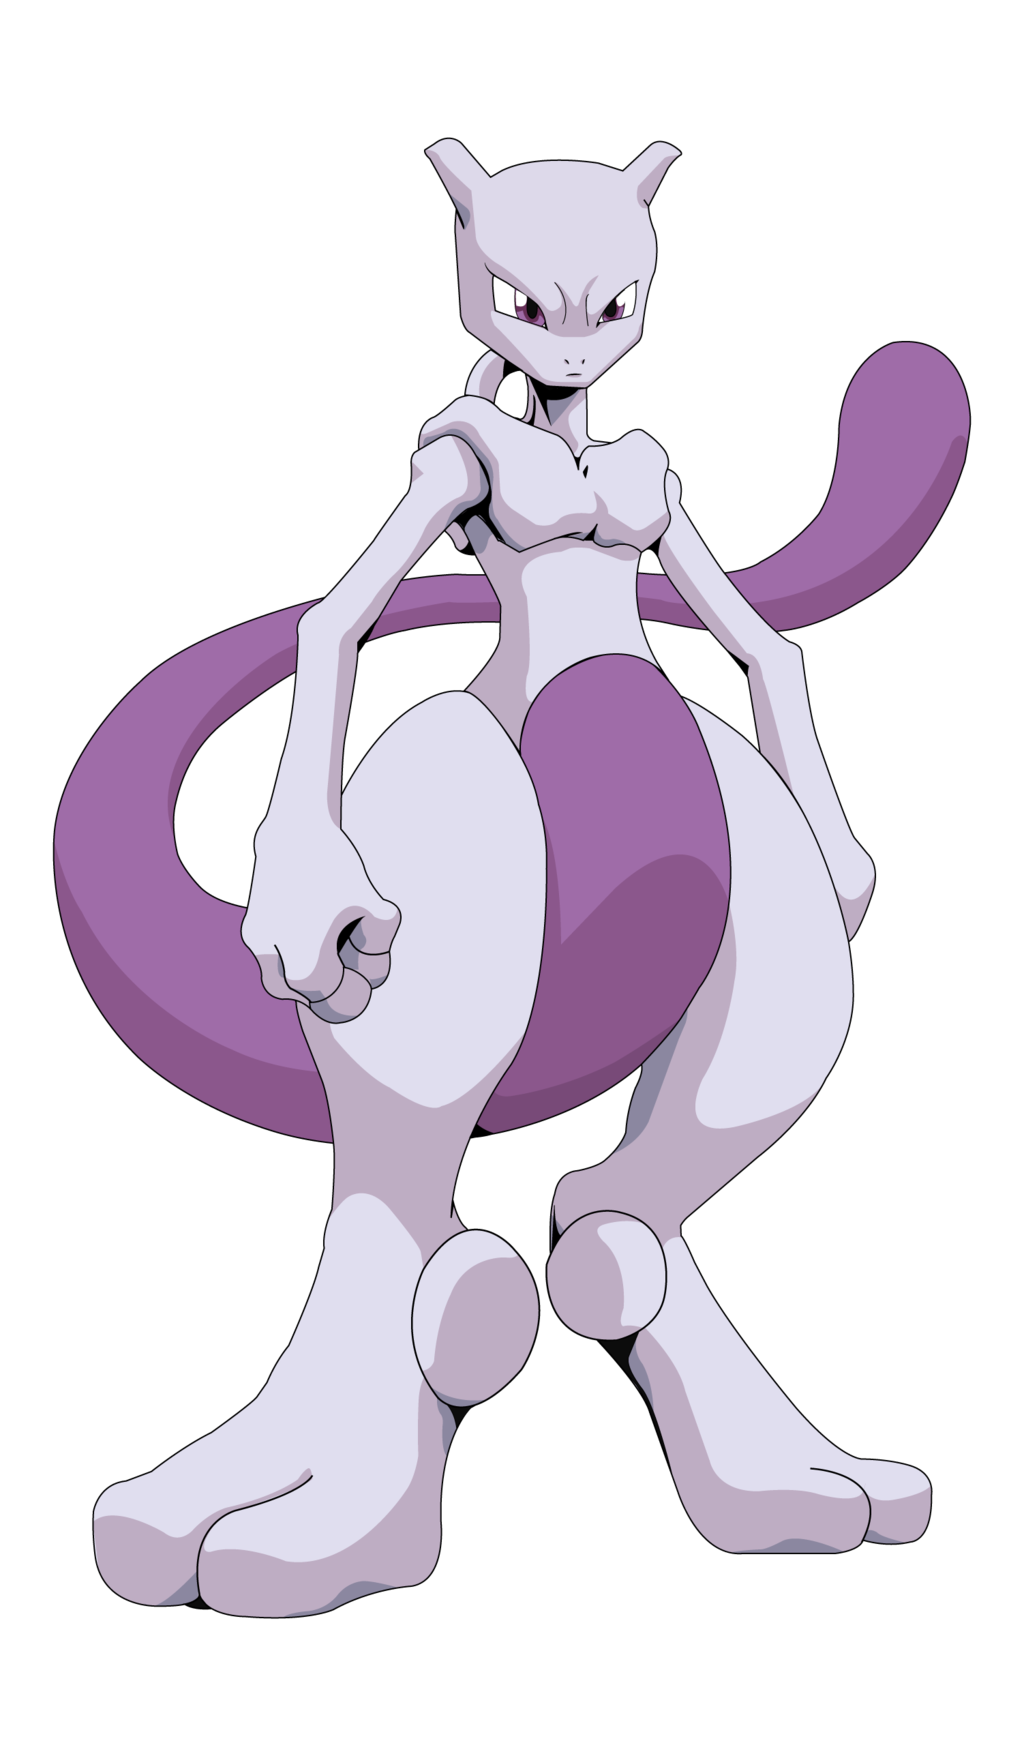 Pokemon Species Mewtwo Free Download PNG HQ PNG Image